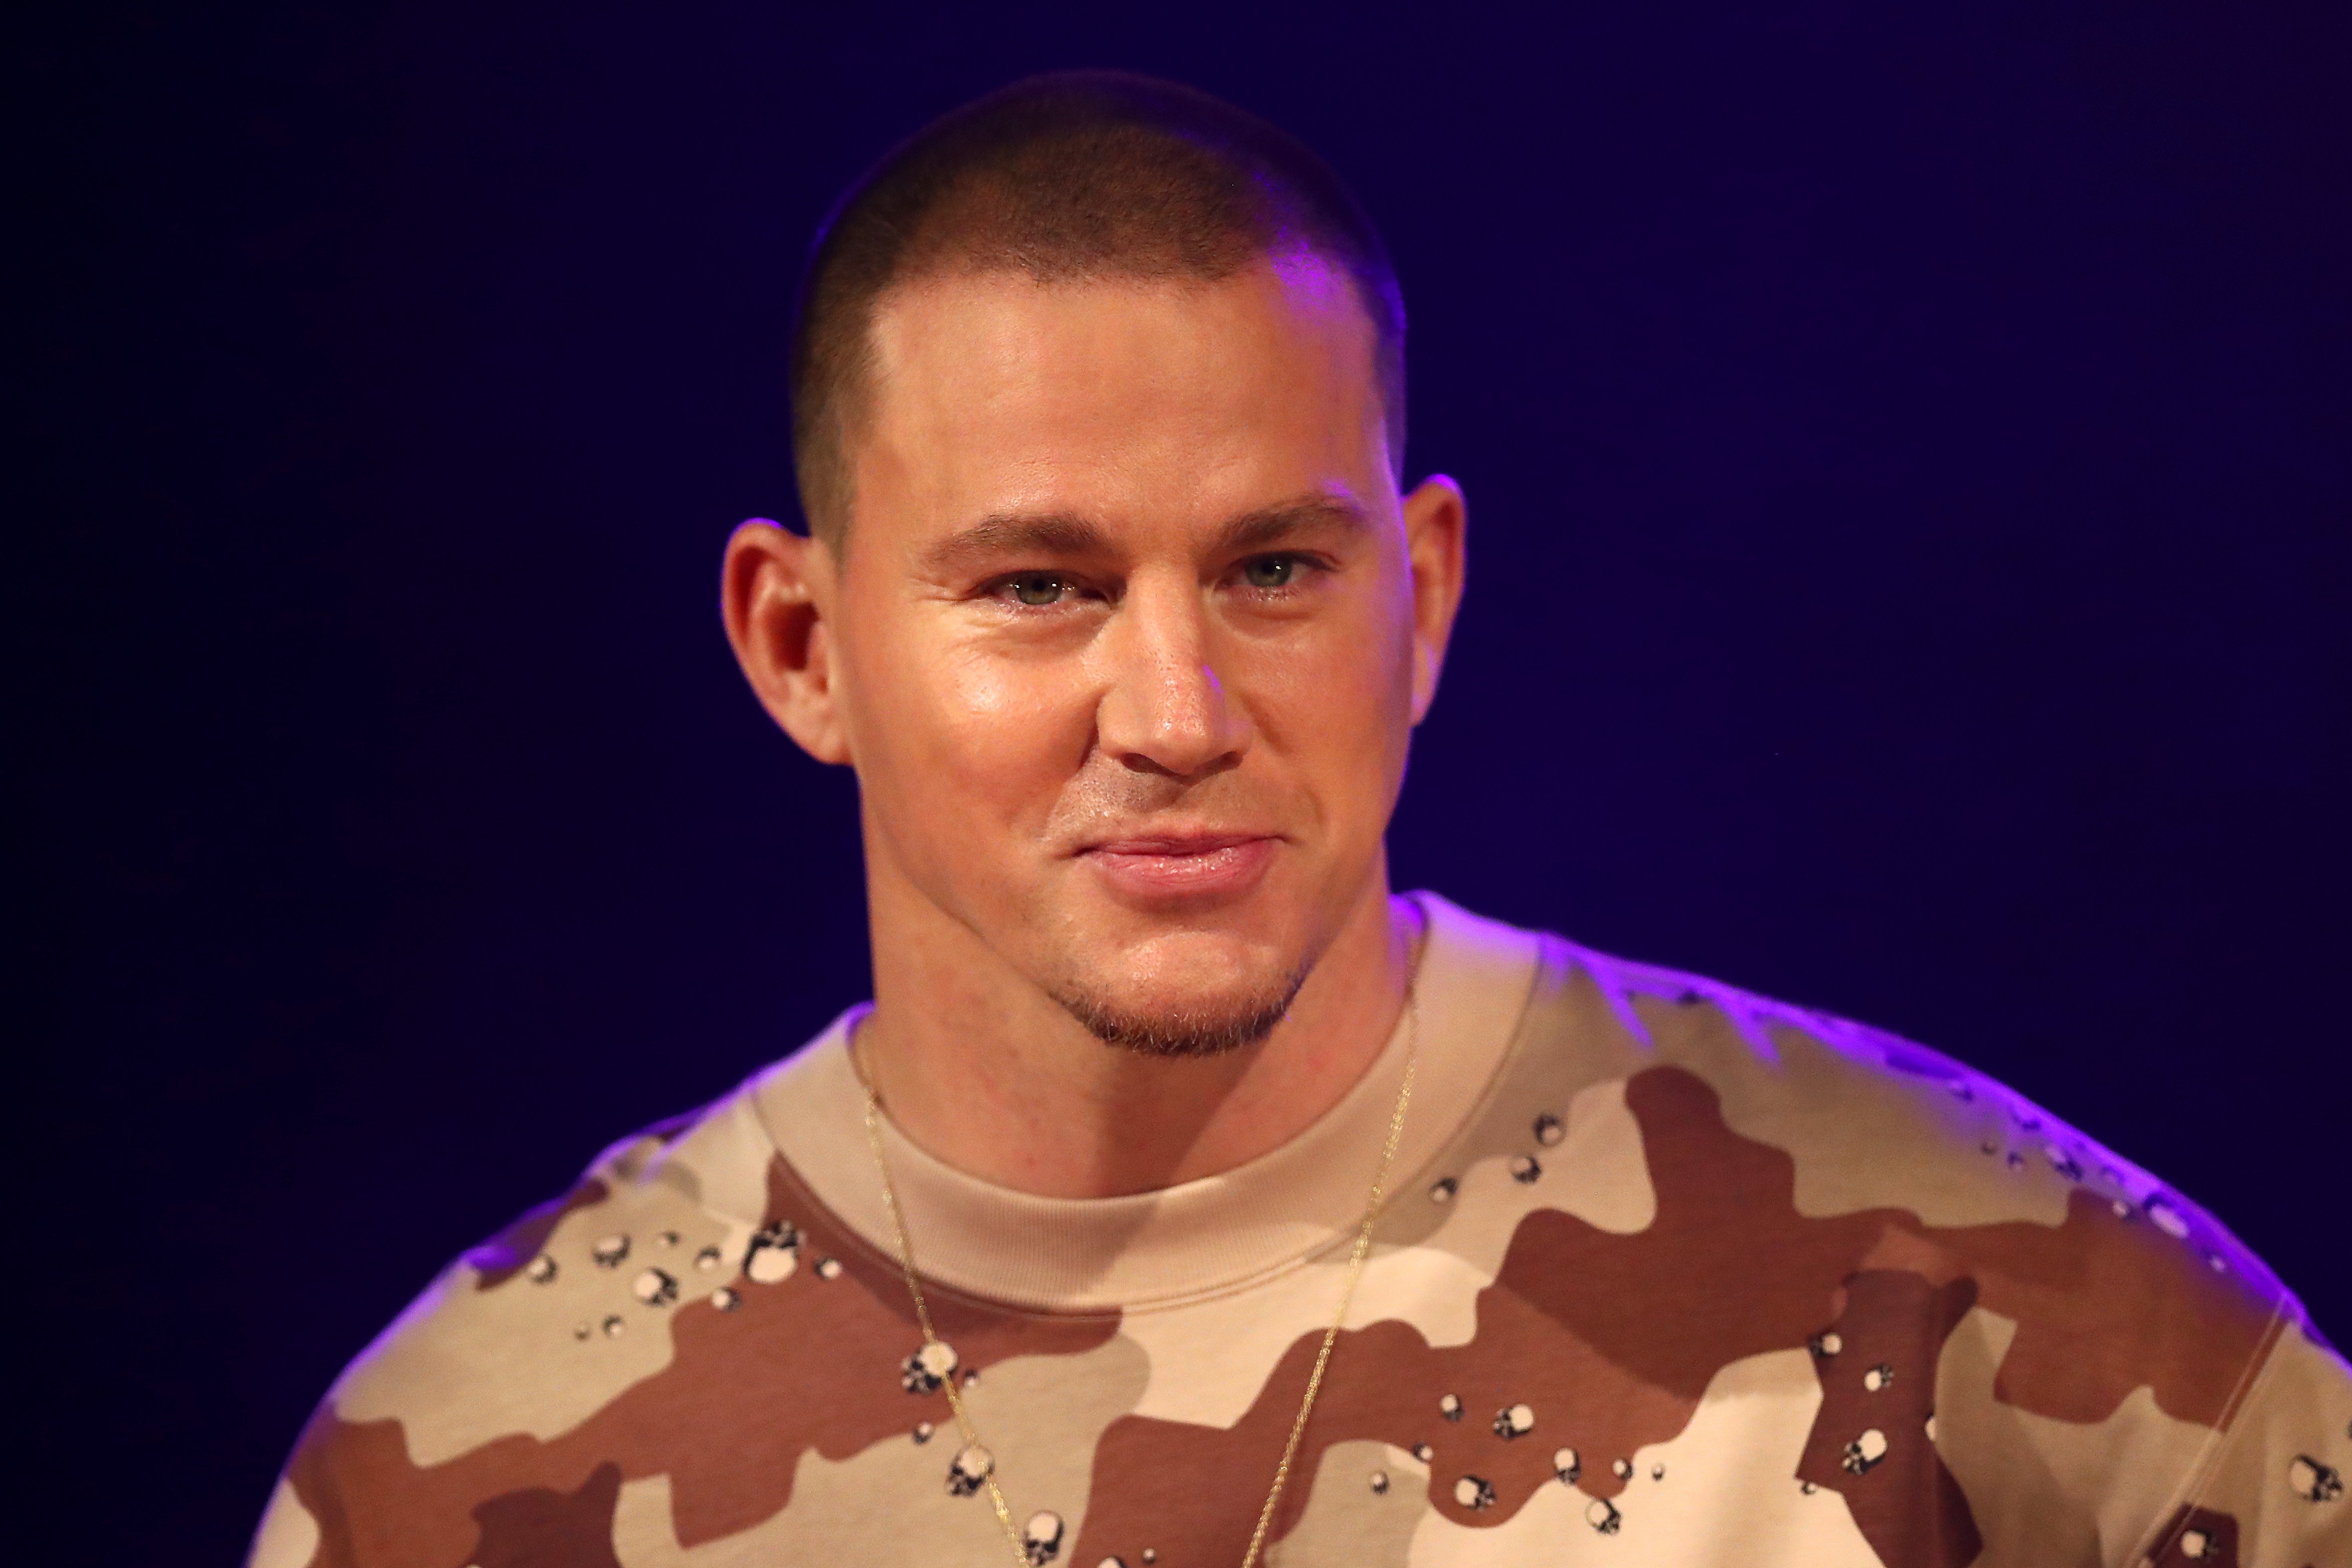 Channing Tatum at a media call on December 3, 2019, in Melbourne, Australia. | Photo: Getty Images